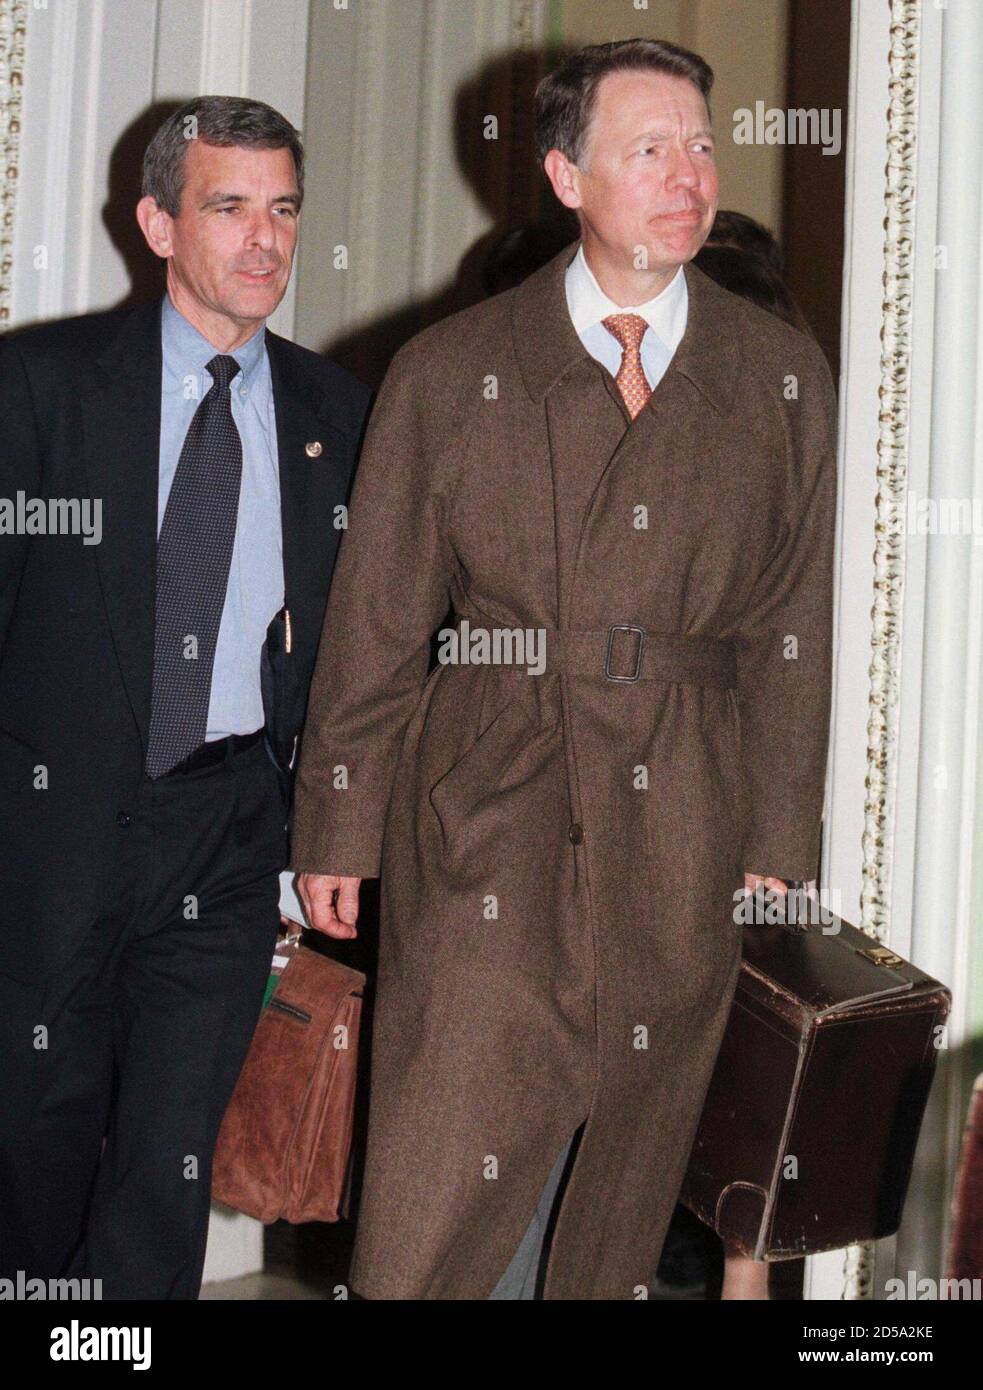 Members of President Clinton's defense team, Bruce Lindsey (L) and ...